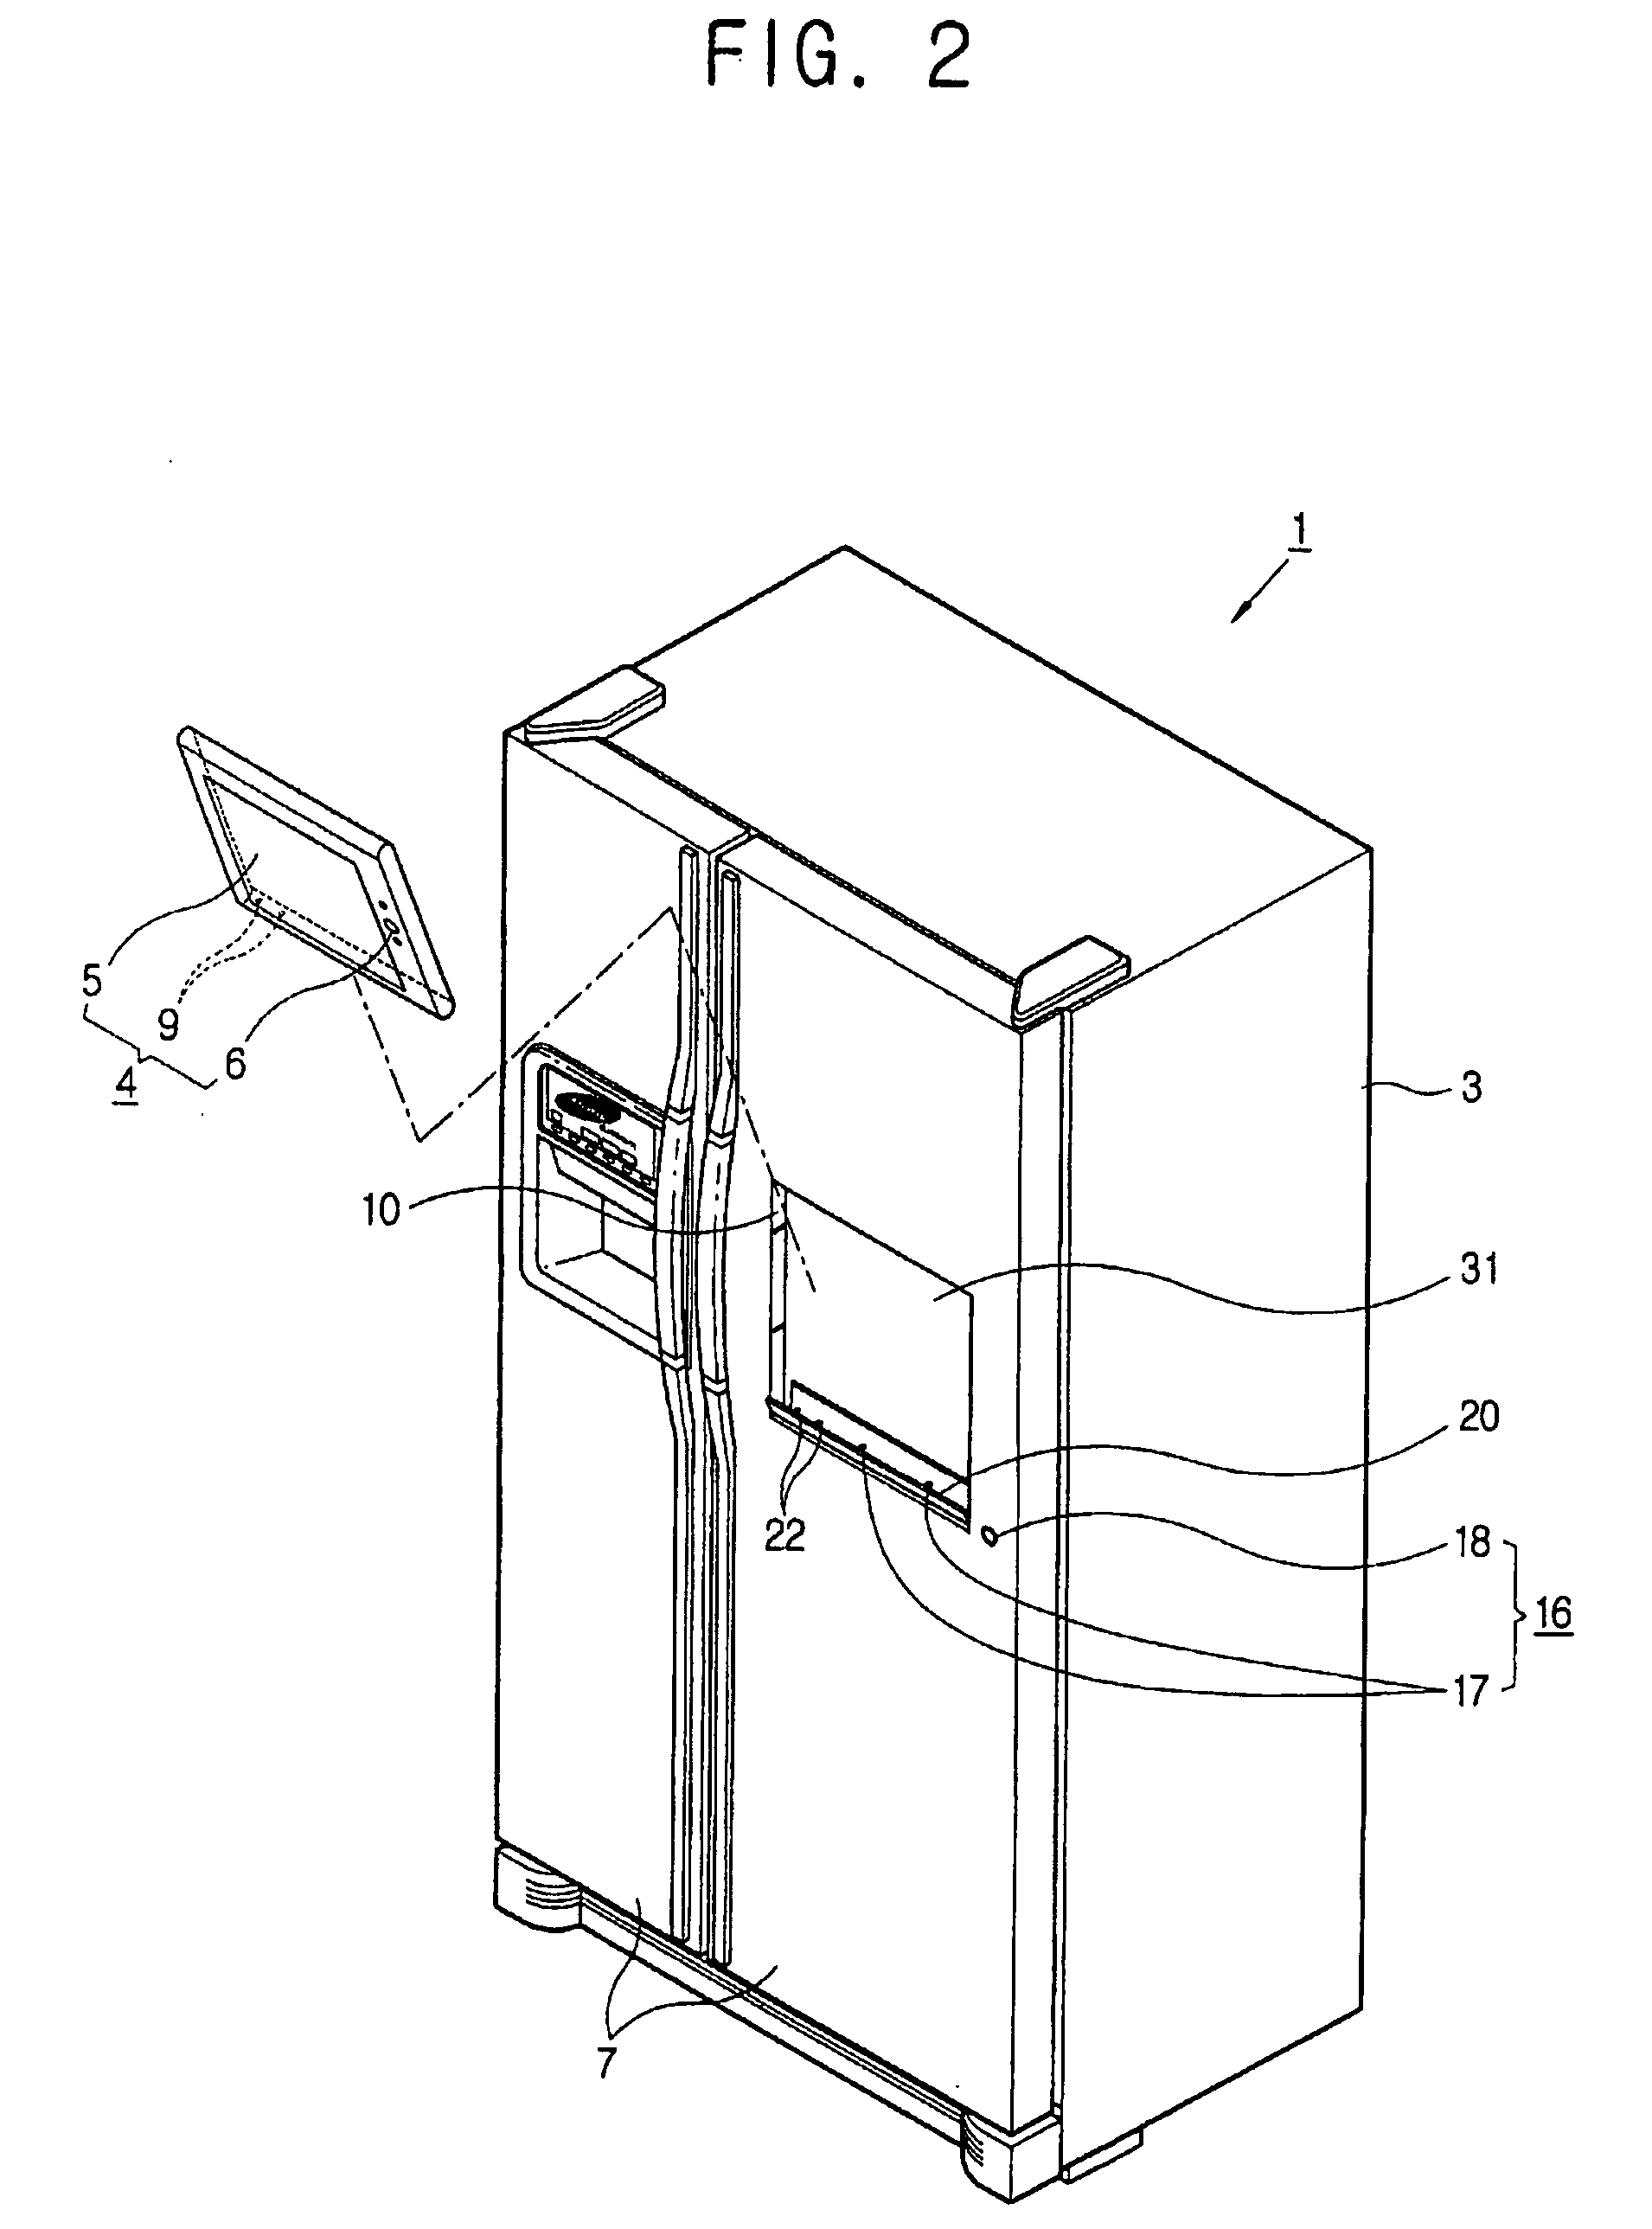 Storage compartment with display support